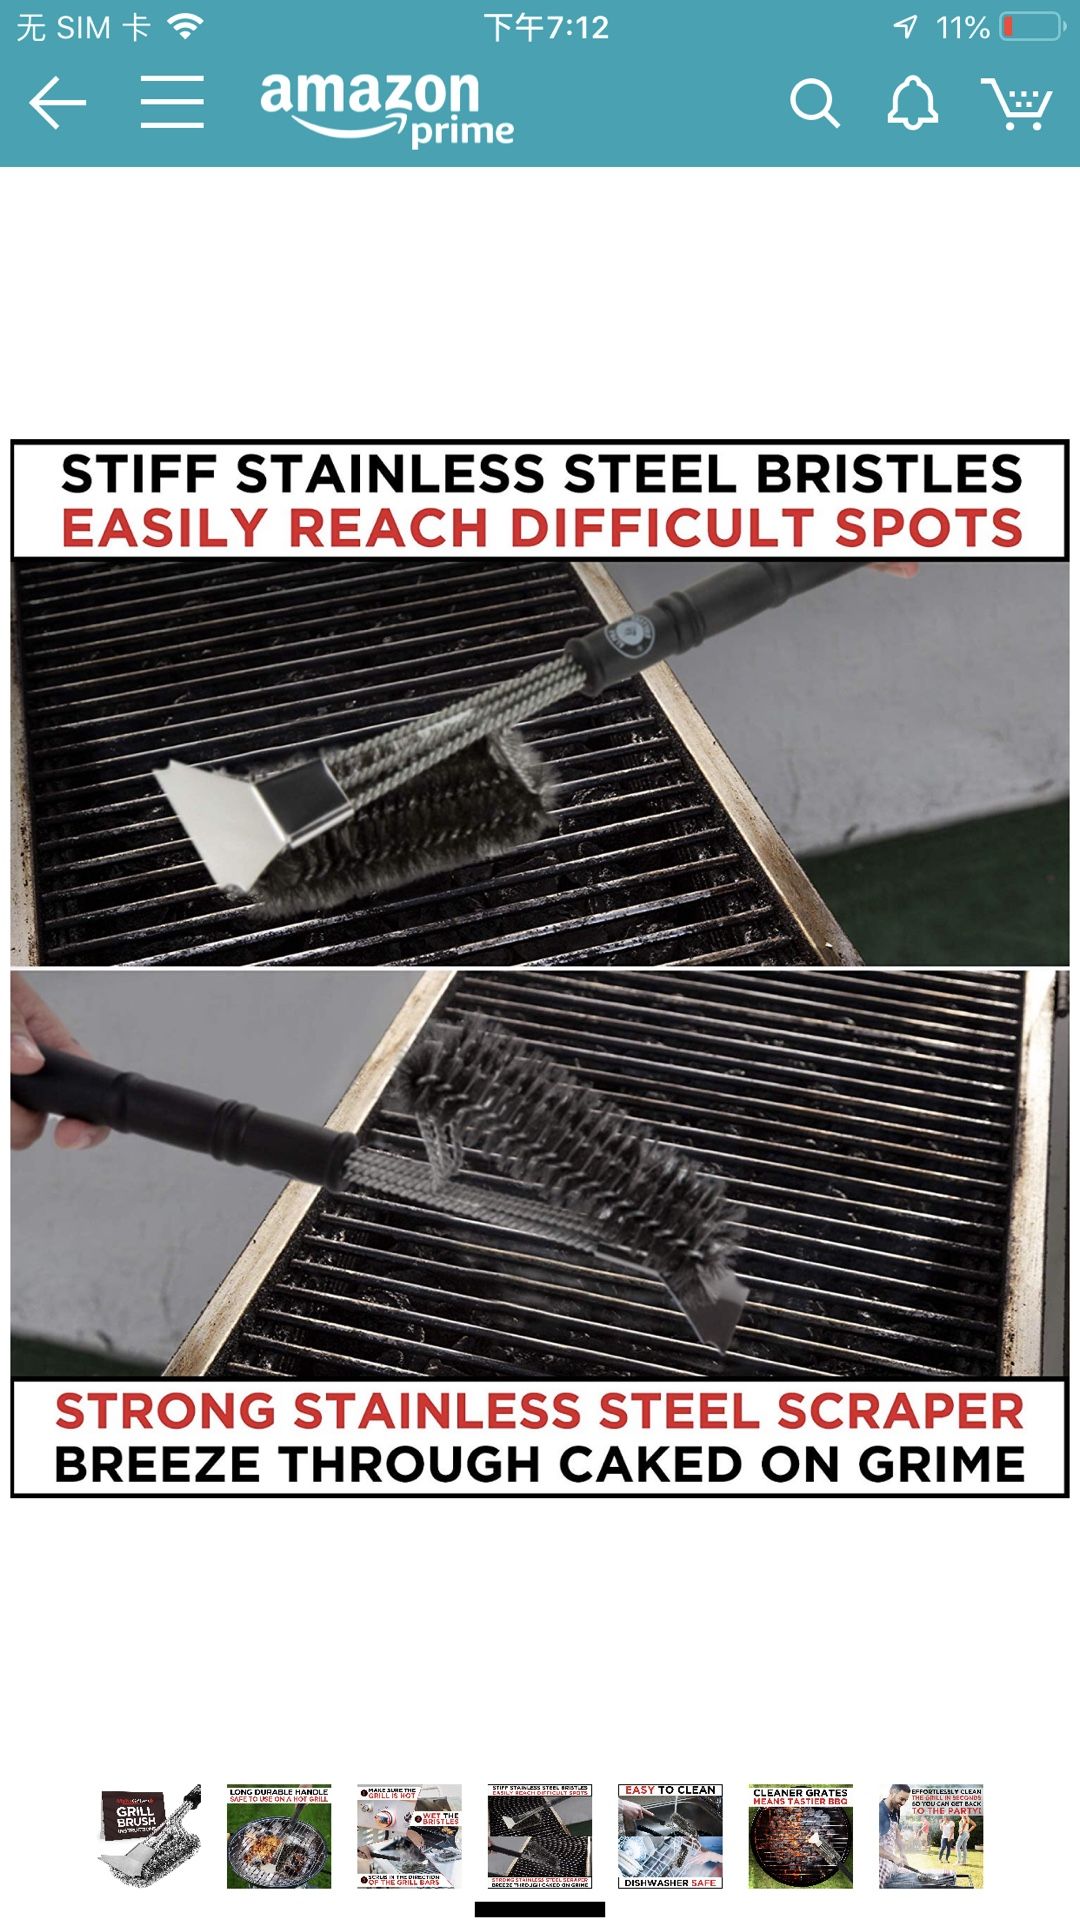 Brand new Alpha Grillers Grill Brush and Scraper. for Sale in